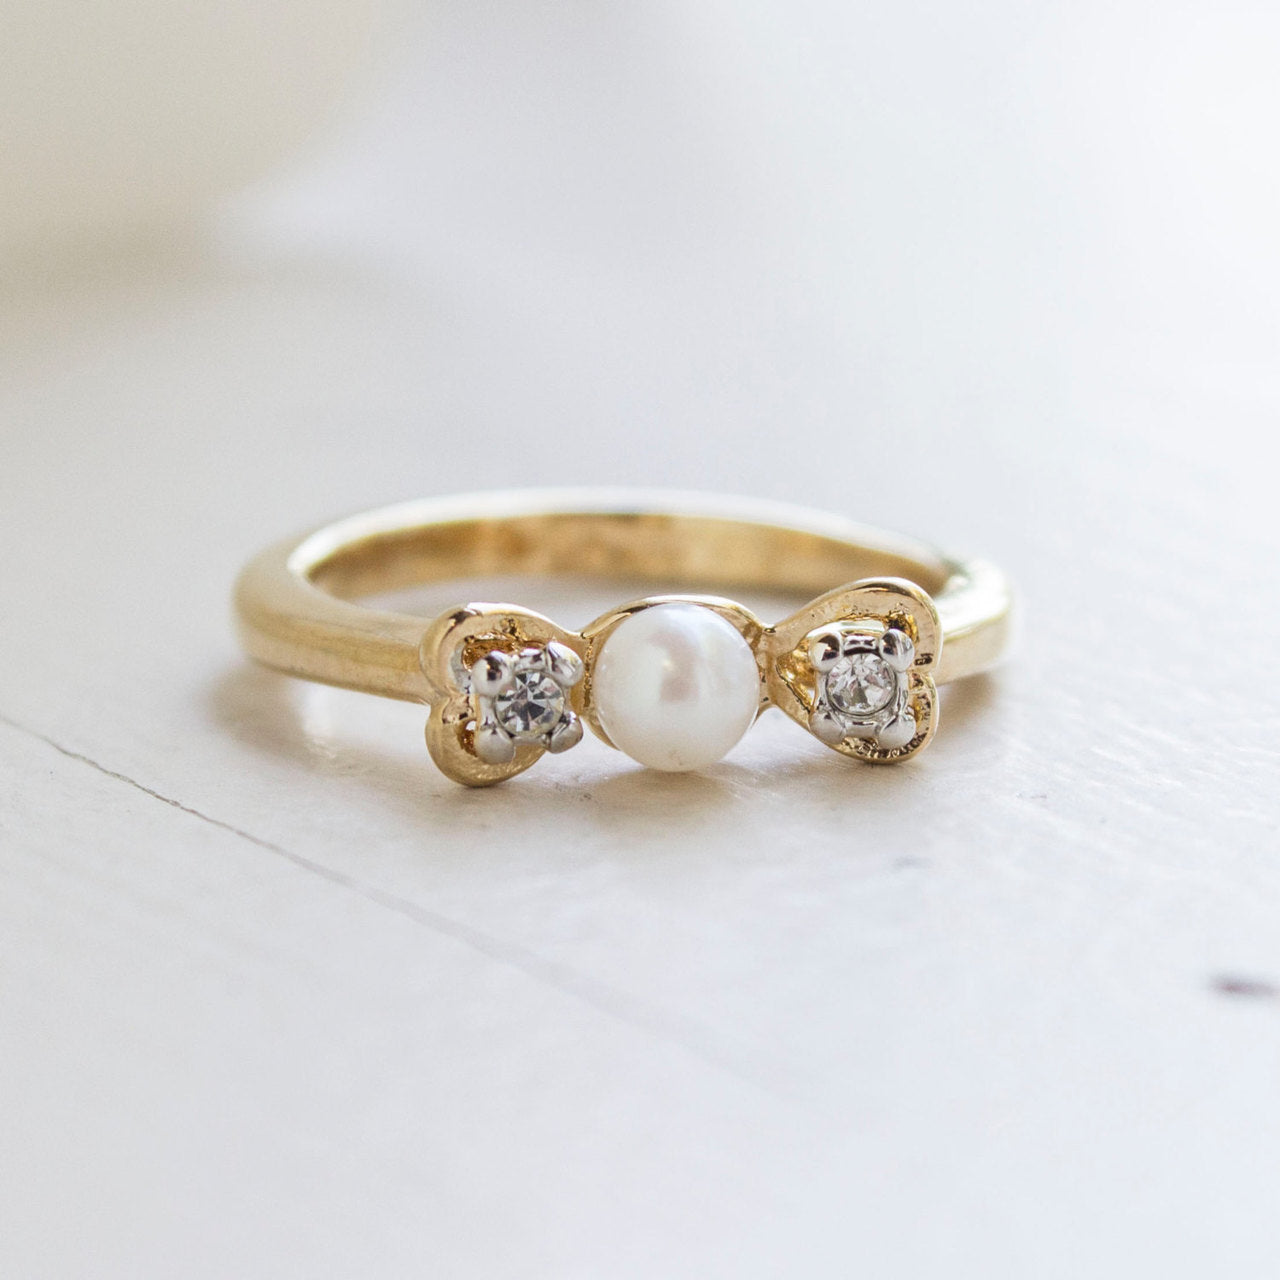 A Vintage Ring Pearl Bead Ring with Swarovski Crystal Accents 18k Gold Pearl Jewelry for Women #R1704 Size: 3